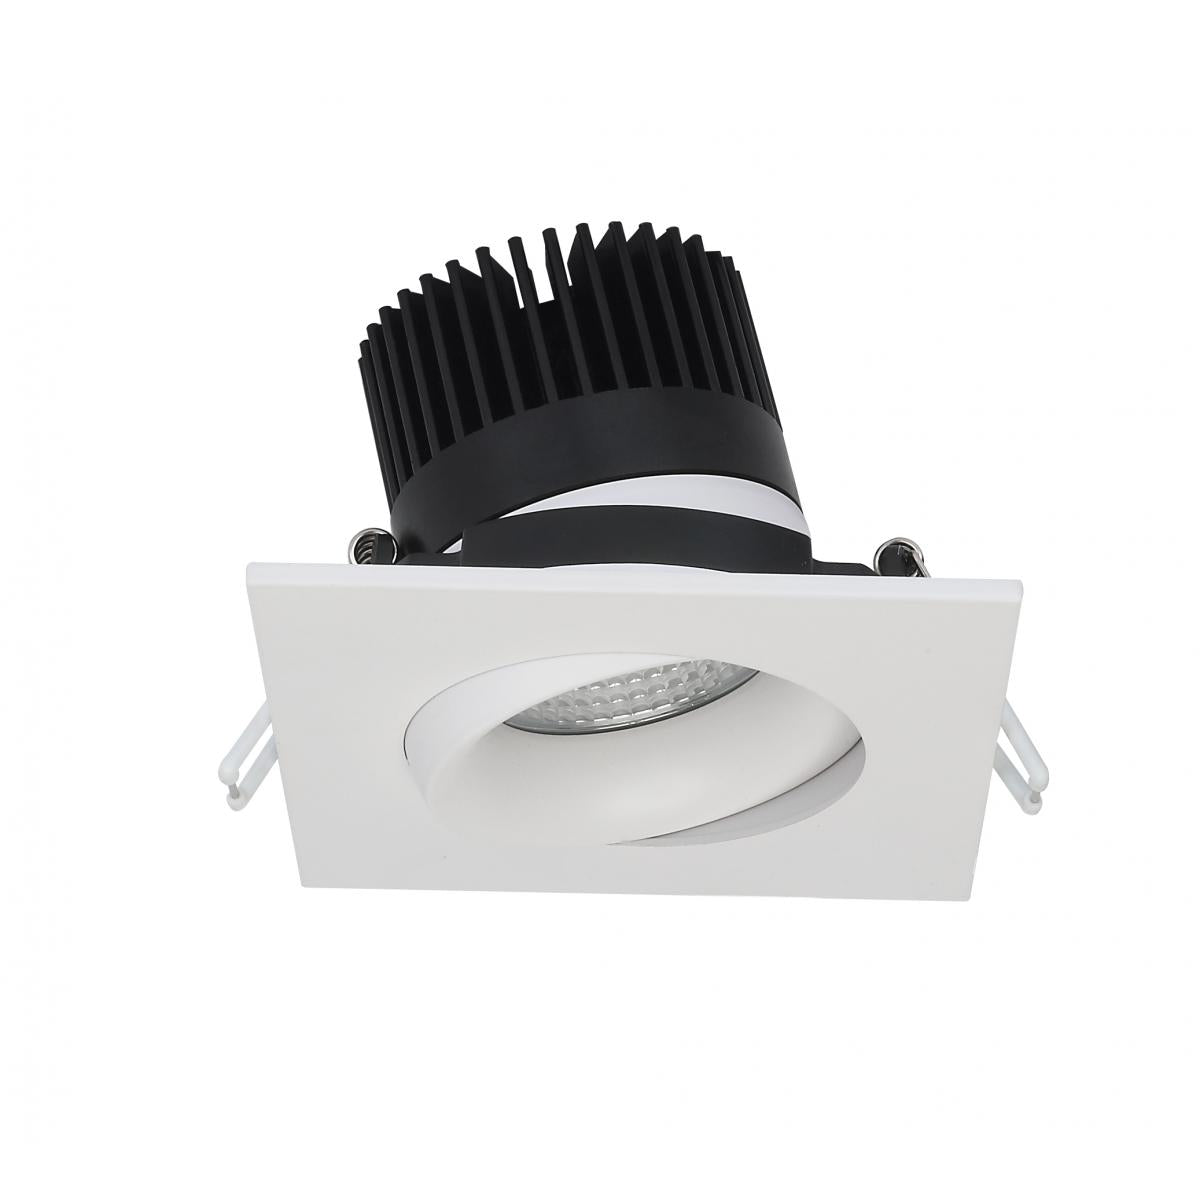 SATCO-S11627SATCO S11627 12W LED Square Recessed GIMBALED Direct Wire Downlight 3.5" 30K